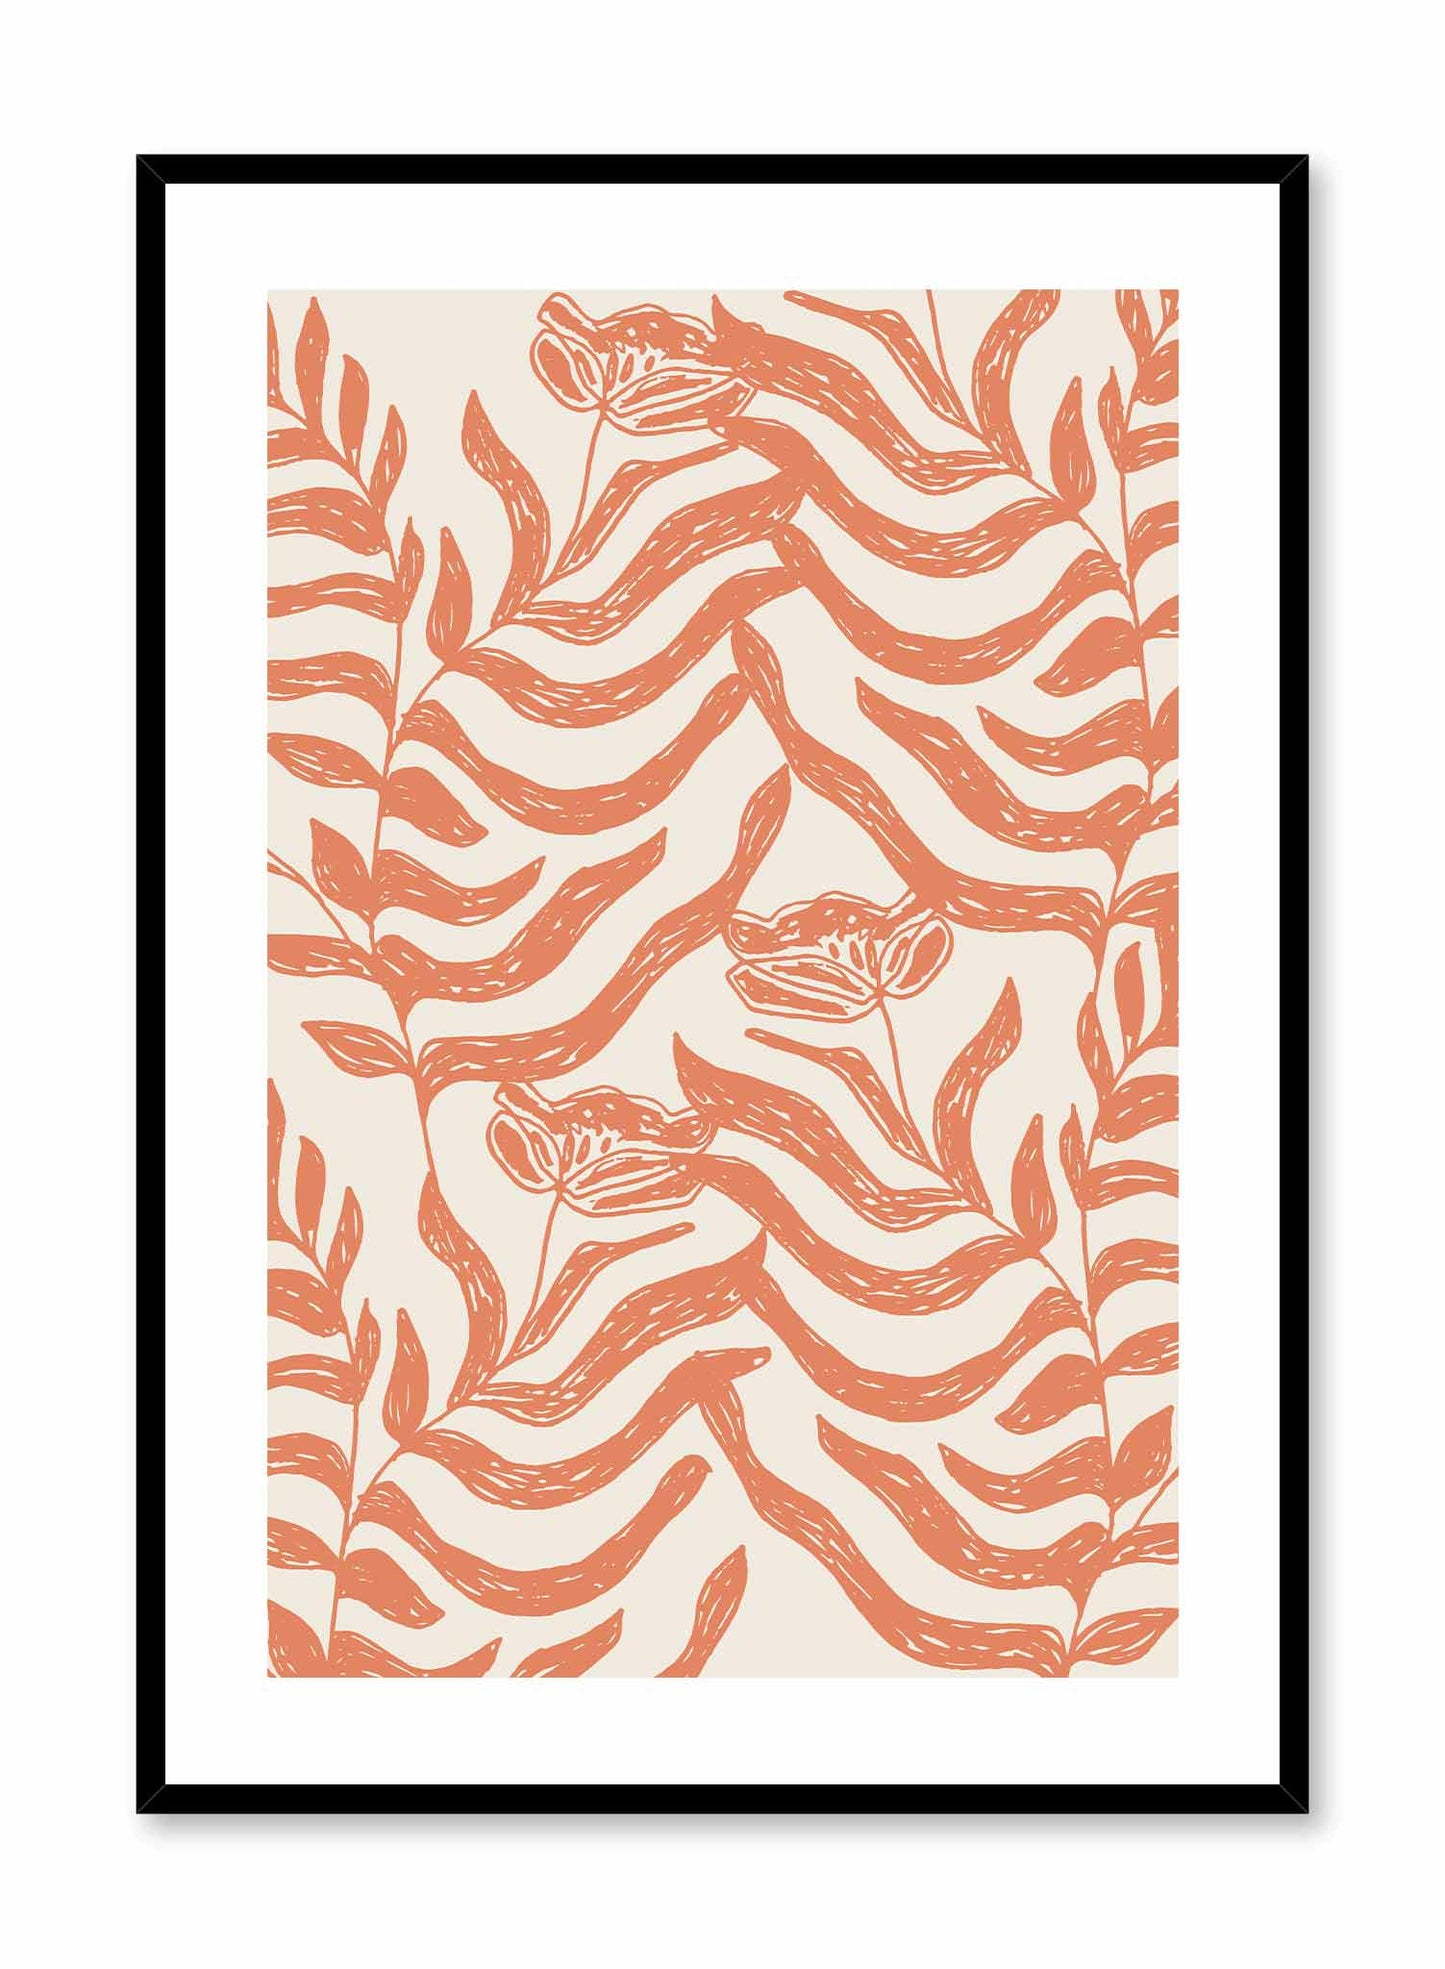 Floral Reef is a vector illustration of a bush of bright orange flowers by Opposite Wall.